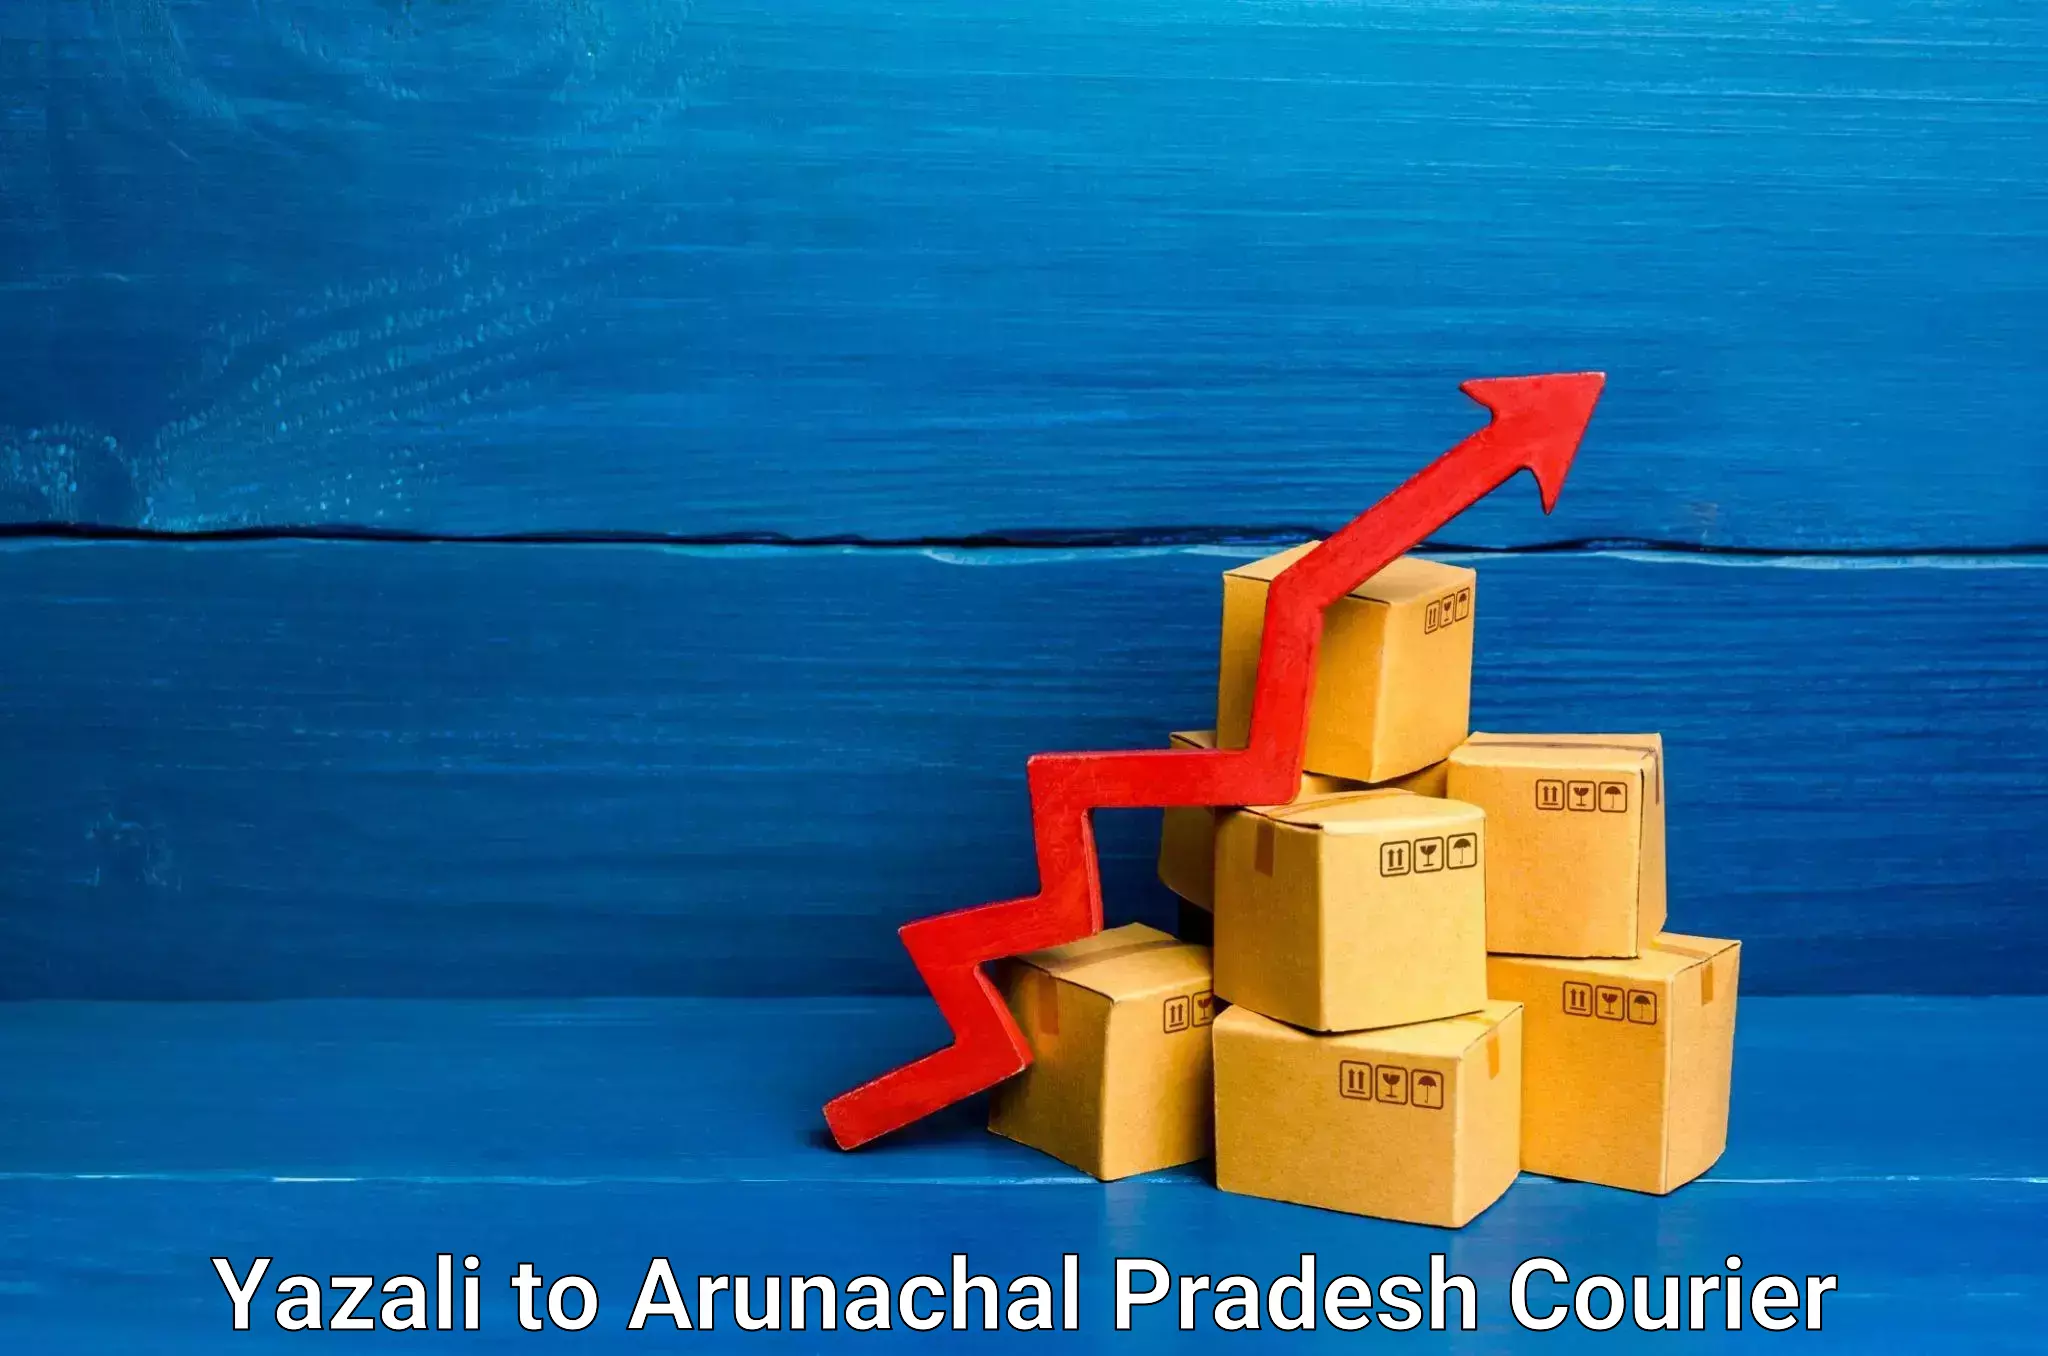 Subscription-based courier Yazali to Dirang